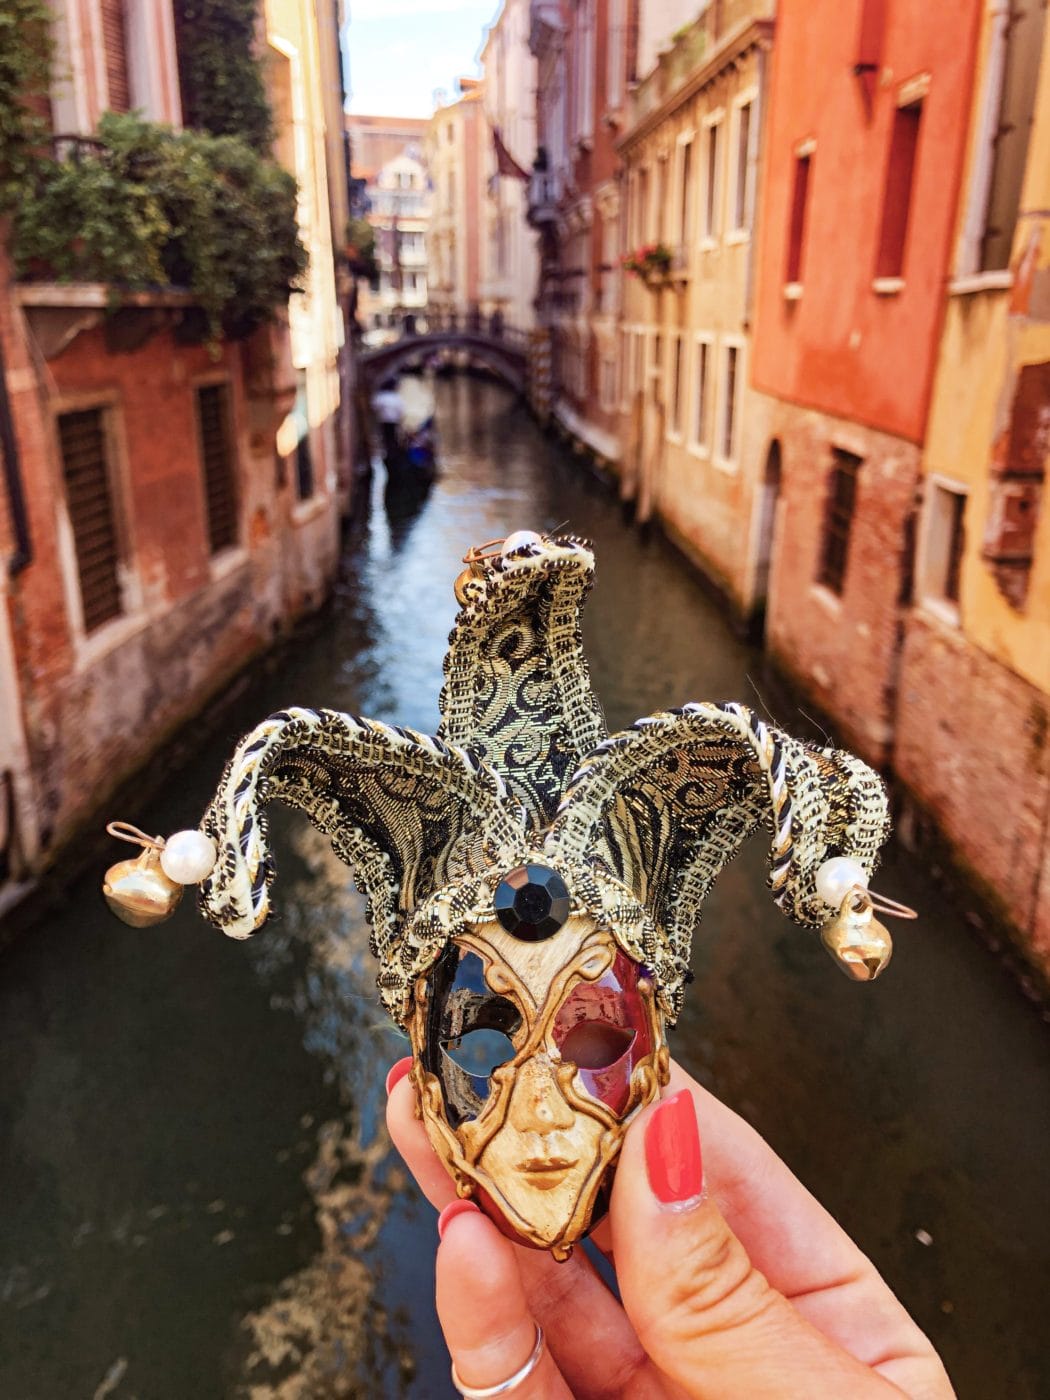 2 days in venice - shopping for traditional authentic venetian masks